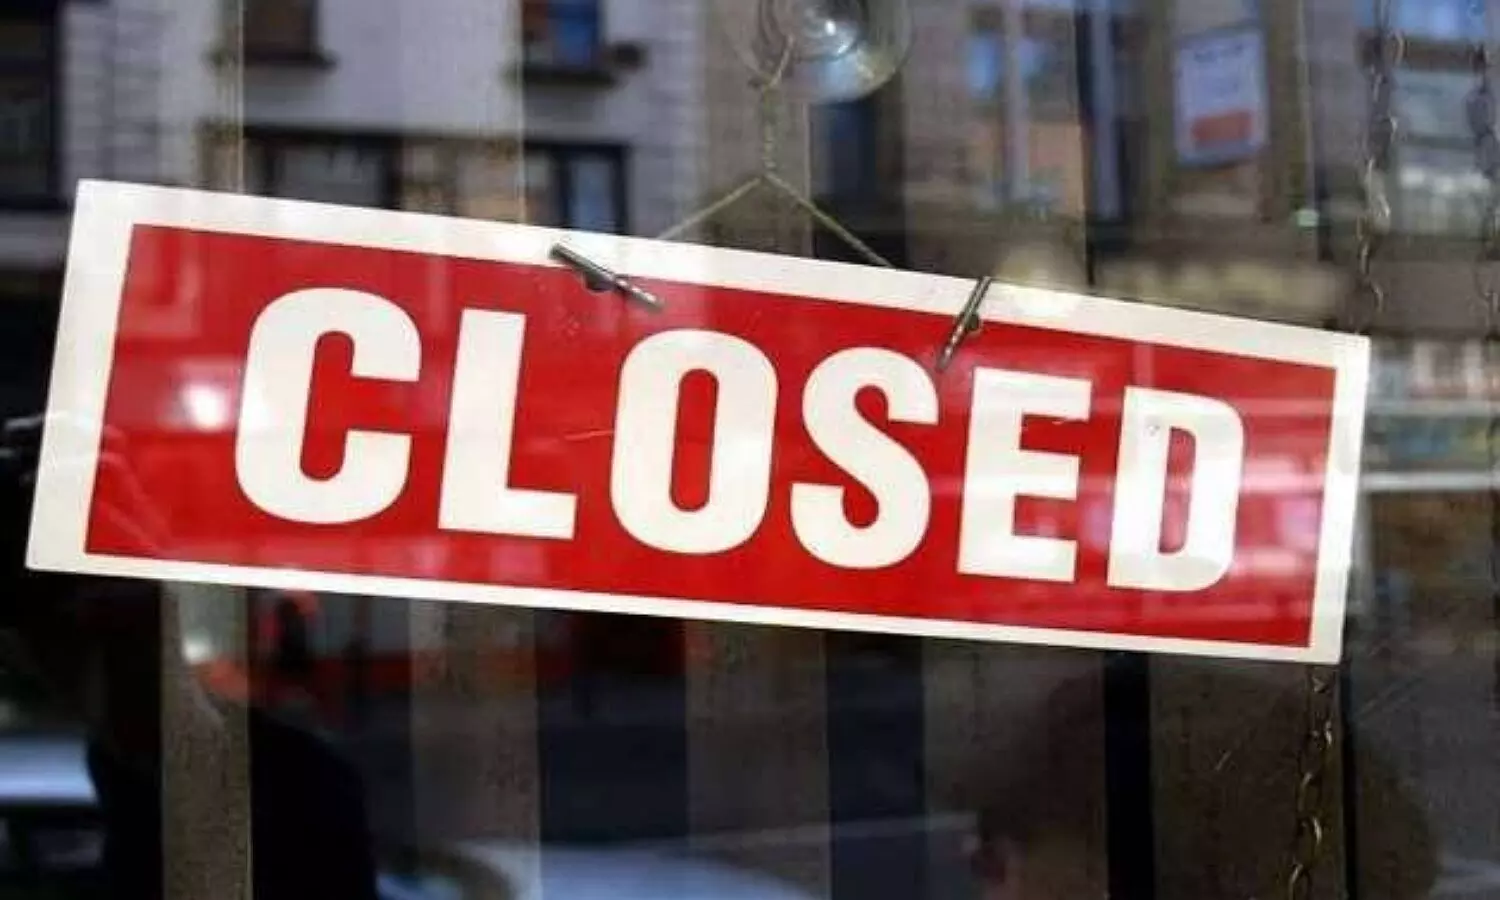 Banks will remain closed for 6 days